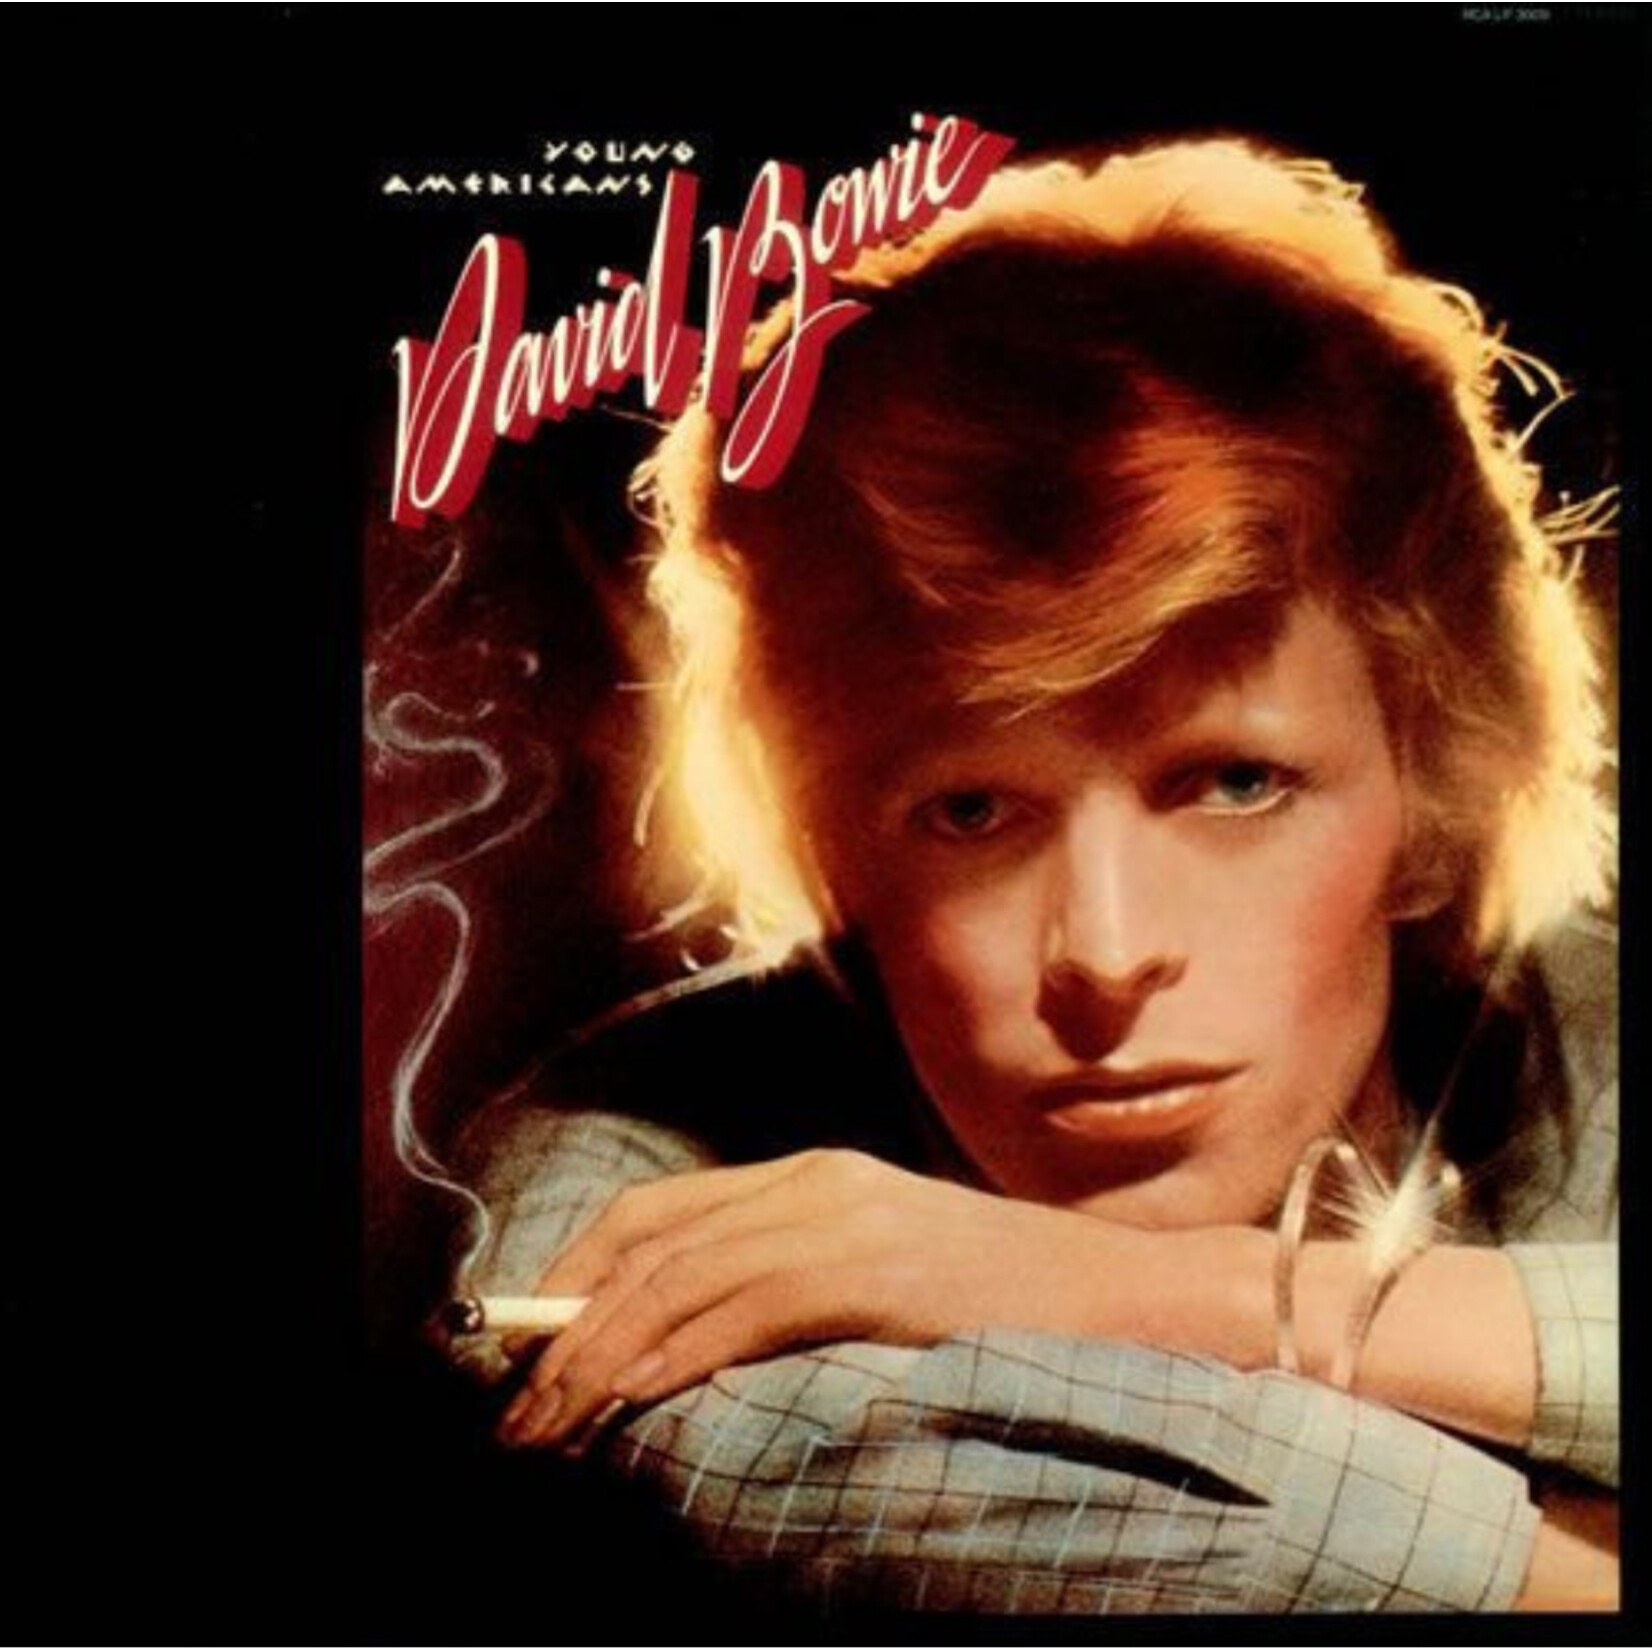 David Bowie - Young Americans - RPLH219055 - Vinyl LP (NEW)